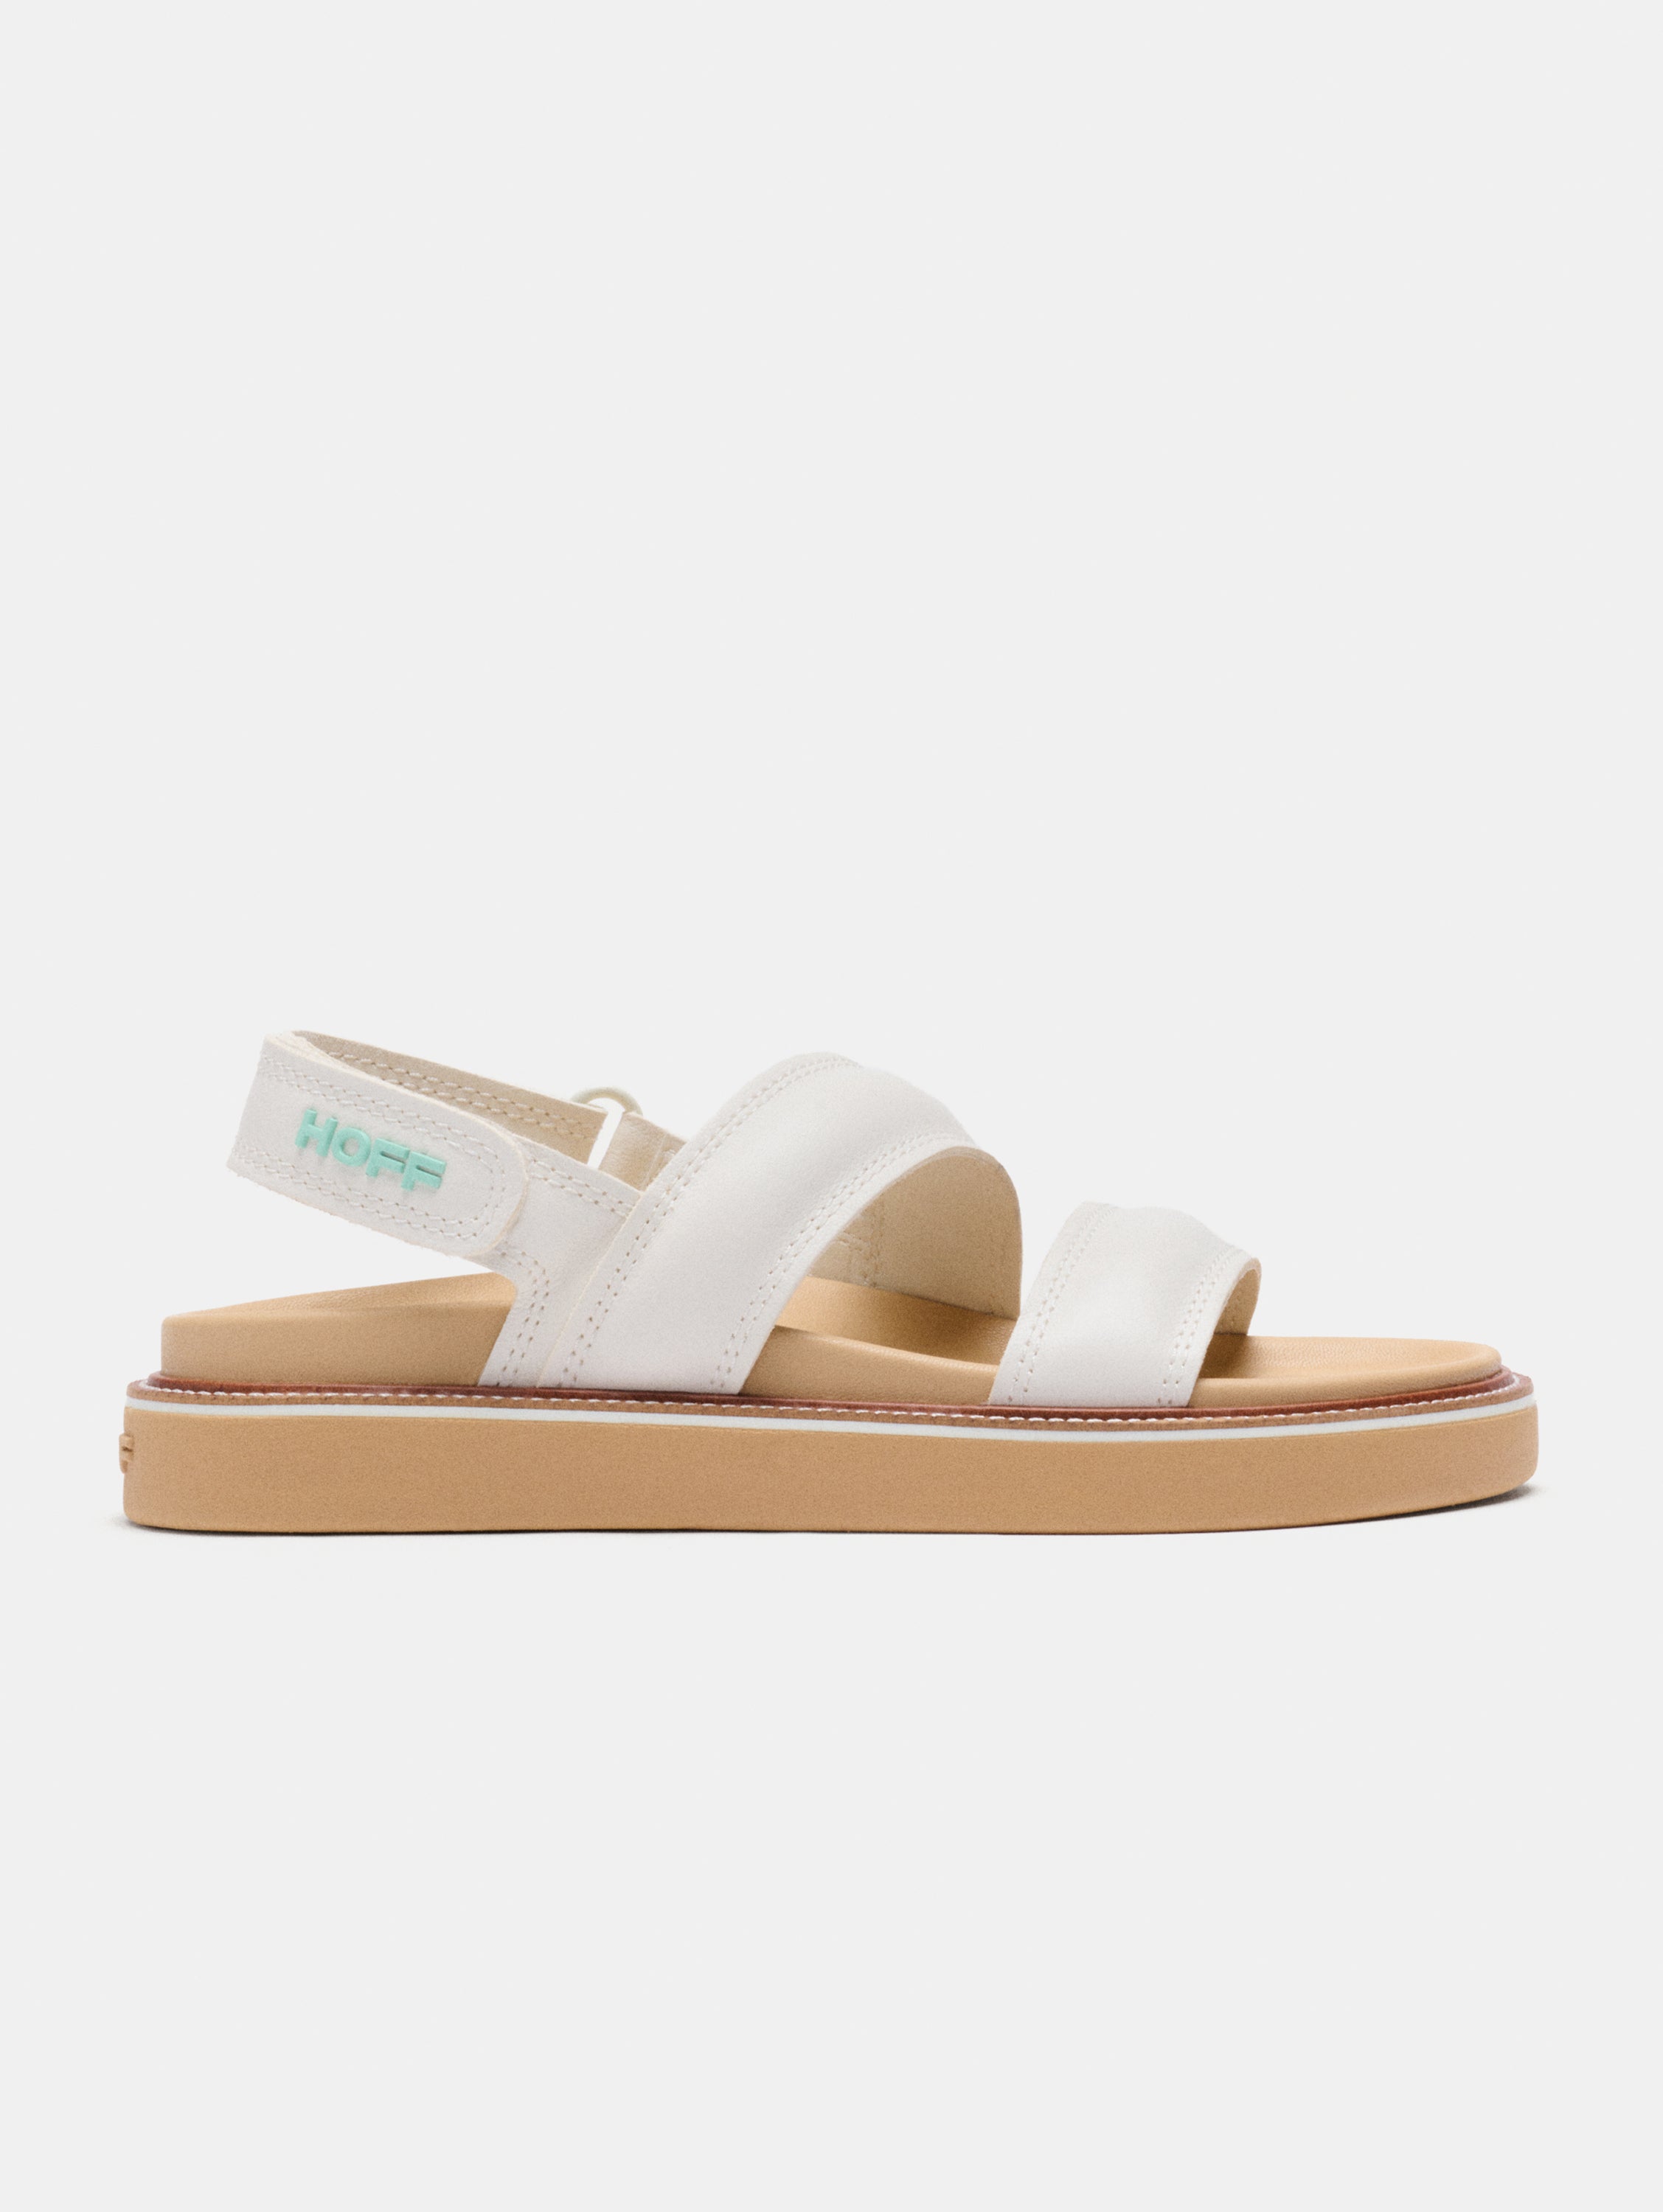 SANDAL LEATHER ROAD OFF WHITE 